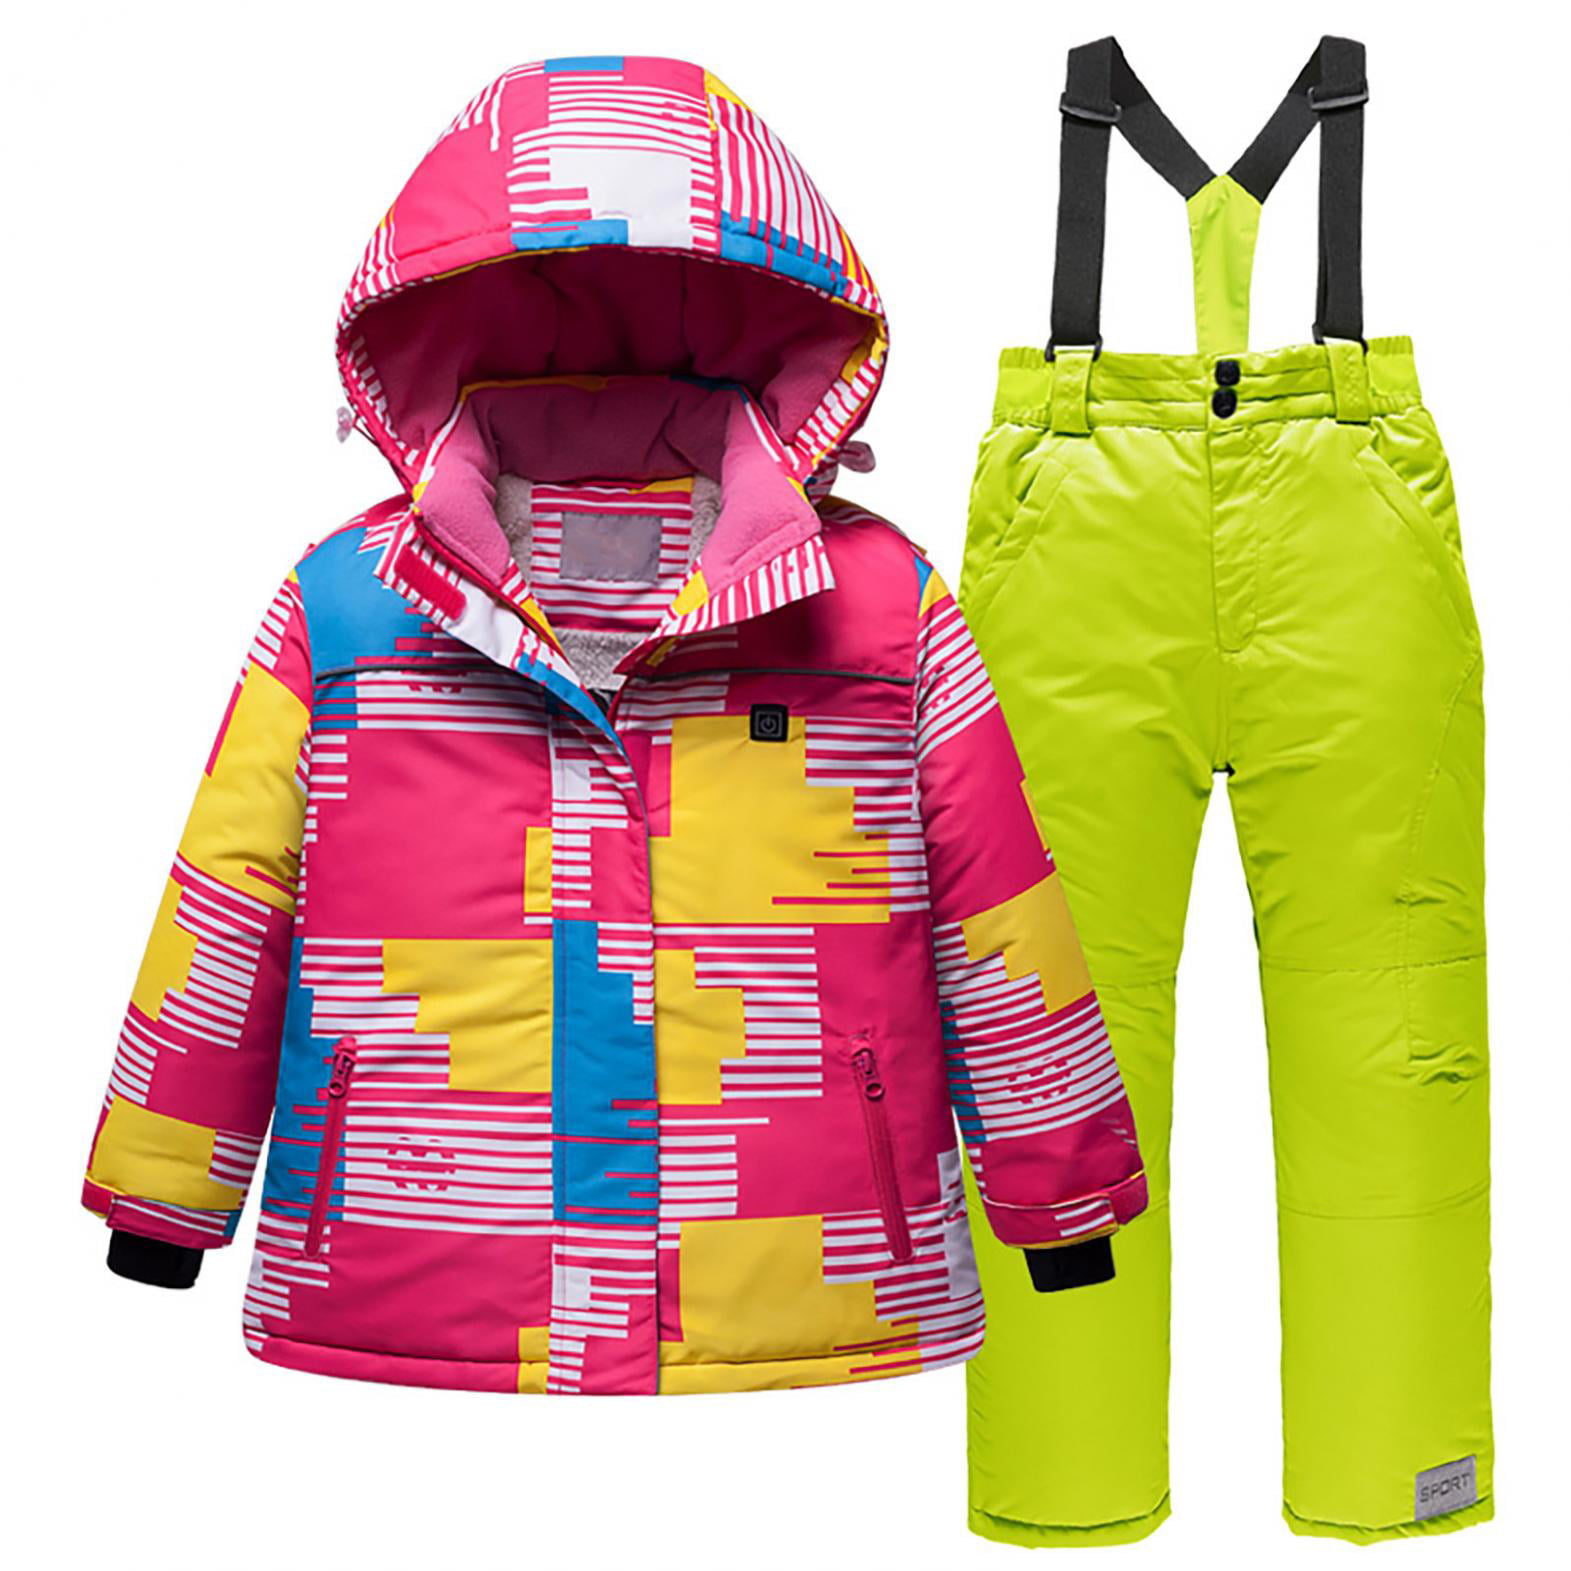 Baby Winter 3 Piece Snowsuit Hooded Down Jacket Snow Bib Pants Scarf Kids Ski Suit Outfit Clothing